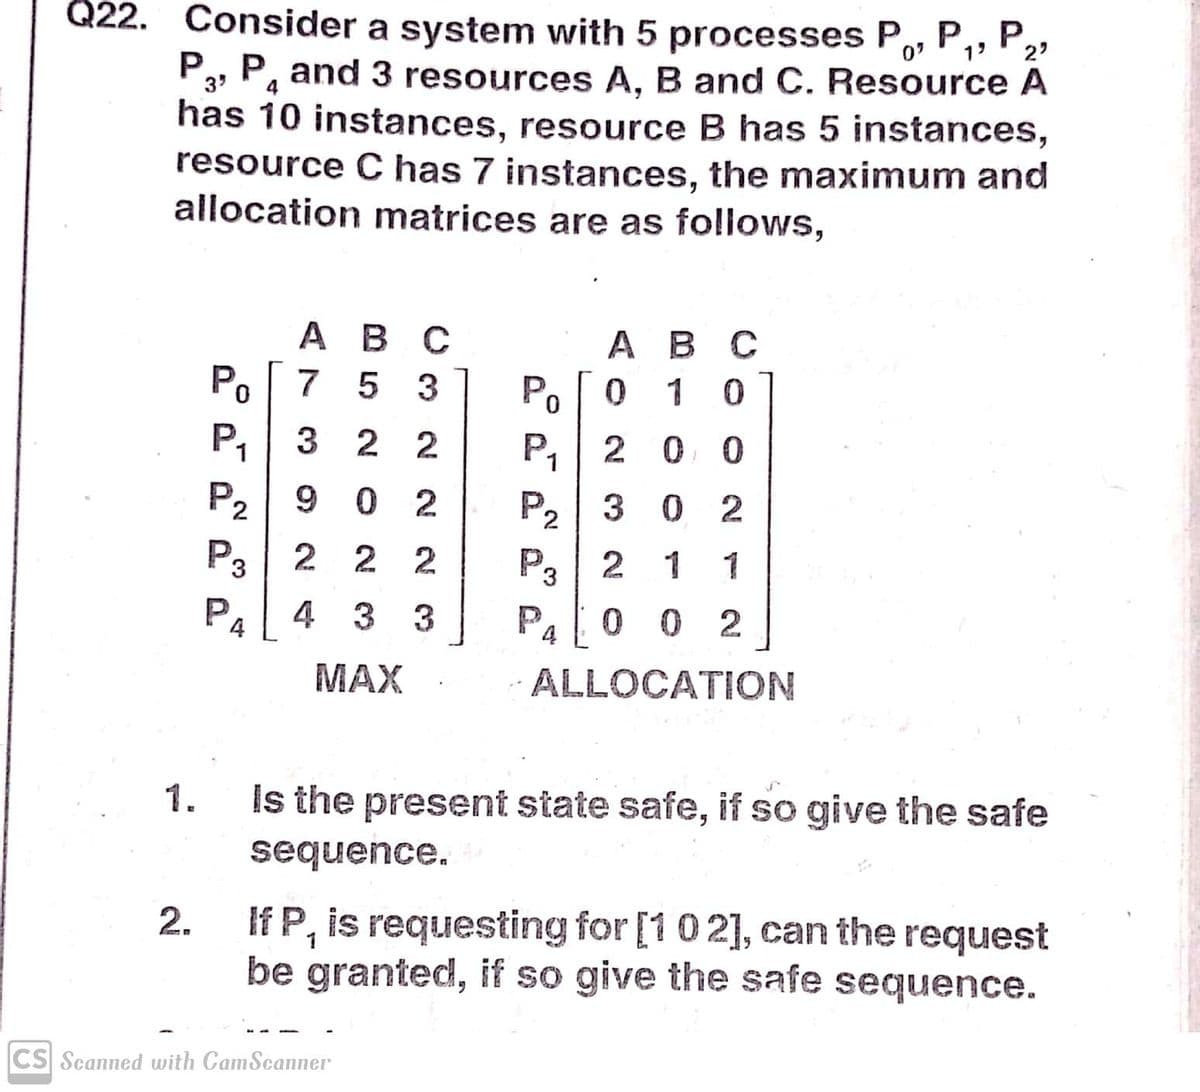 Q22. Consider a system with 5 processes P,, P,, P,
2'
P3, P, and 3 resources A, B and C. Resource A
has 10 instances, resource B has 5 instances,
resource C has 7 instances, the maximum and
allocation matrices are as follows,
АВ С
0 1 0
A B C
Po 7 5 3
P
P,
P2
P3| 2 2 2
P4
3 2 2
P,| 2 0 0
9 0 2
P, 3 0 2
P3
2 1
1
4 3 3
Pa I0 0 2
MAX
ALLOCATION
Is the present state safe, if so give the safe
1.
sequence.
If P, is requesting for [102], can the request
be granted, if so give the safe sequence.
2.
CS Scanned with CamSeanner
